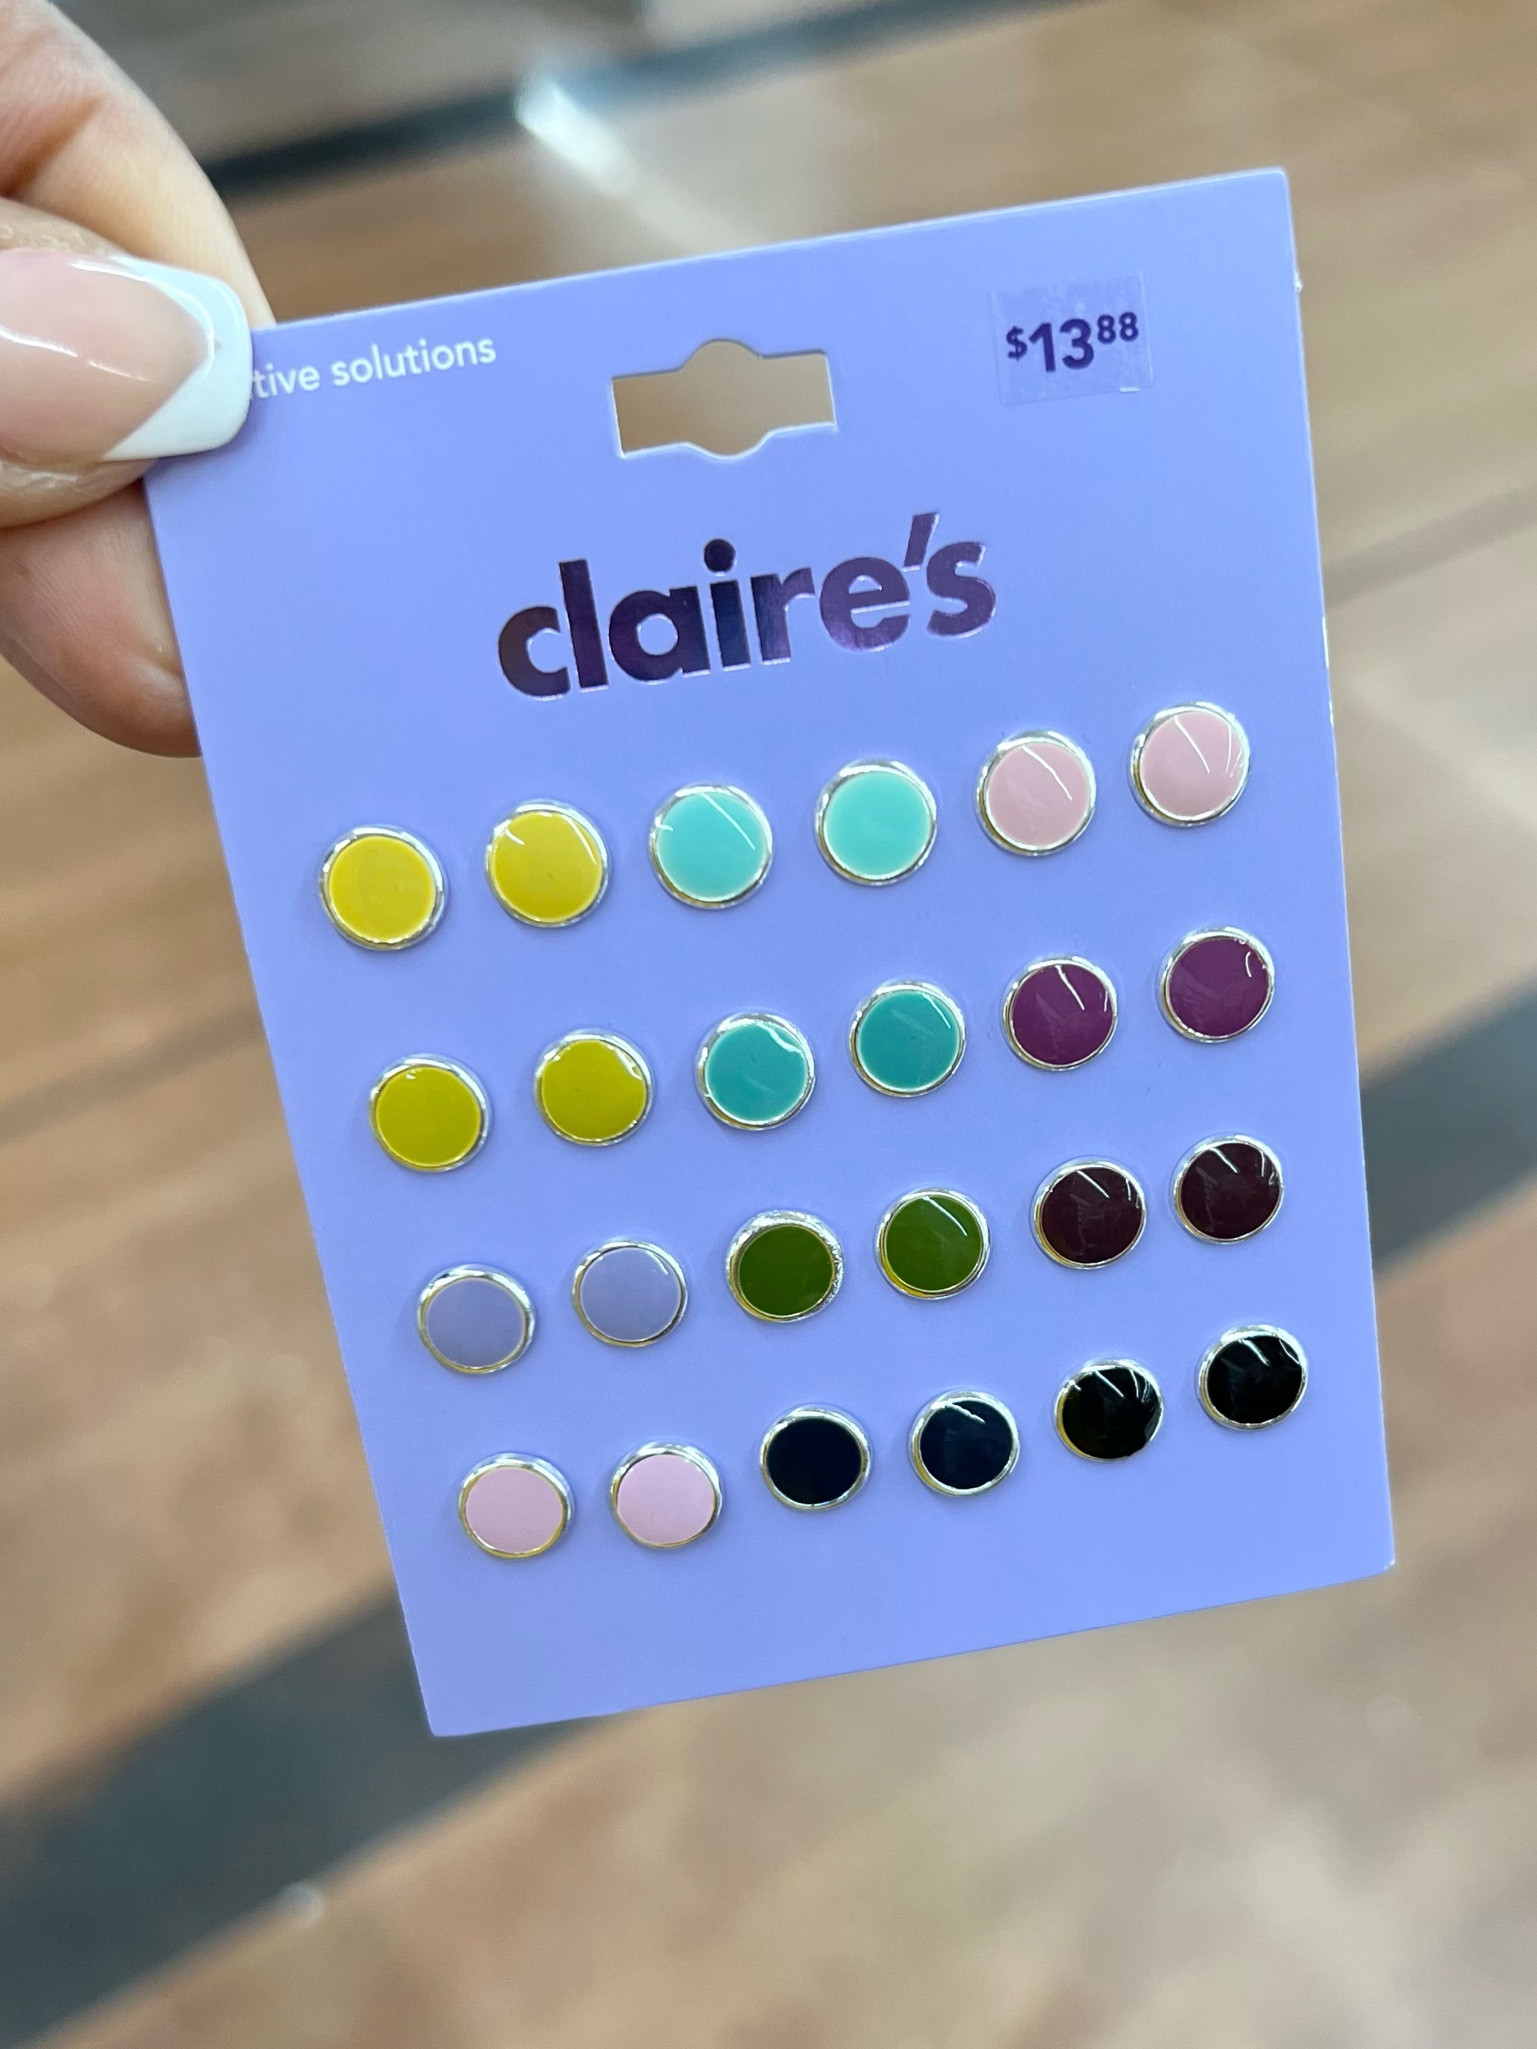 Claire's Sterling Silver Earring Back Replacements - 12 Pack, Women's